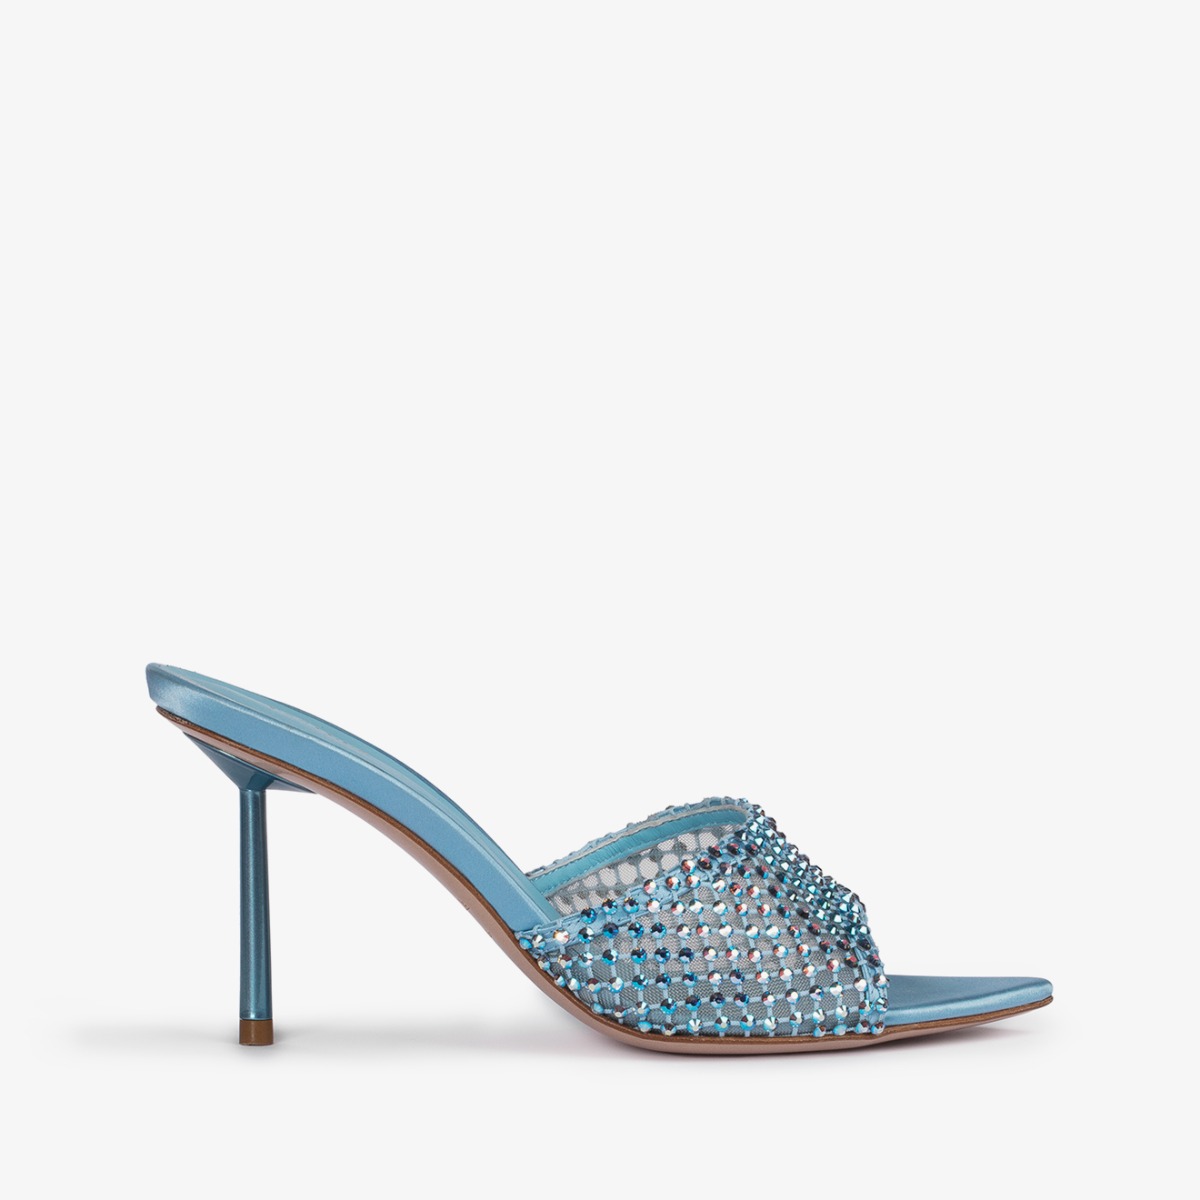 Sky light-blue fishnet mule sandal with Crystals - Le Silla